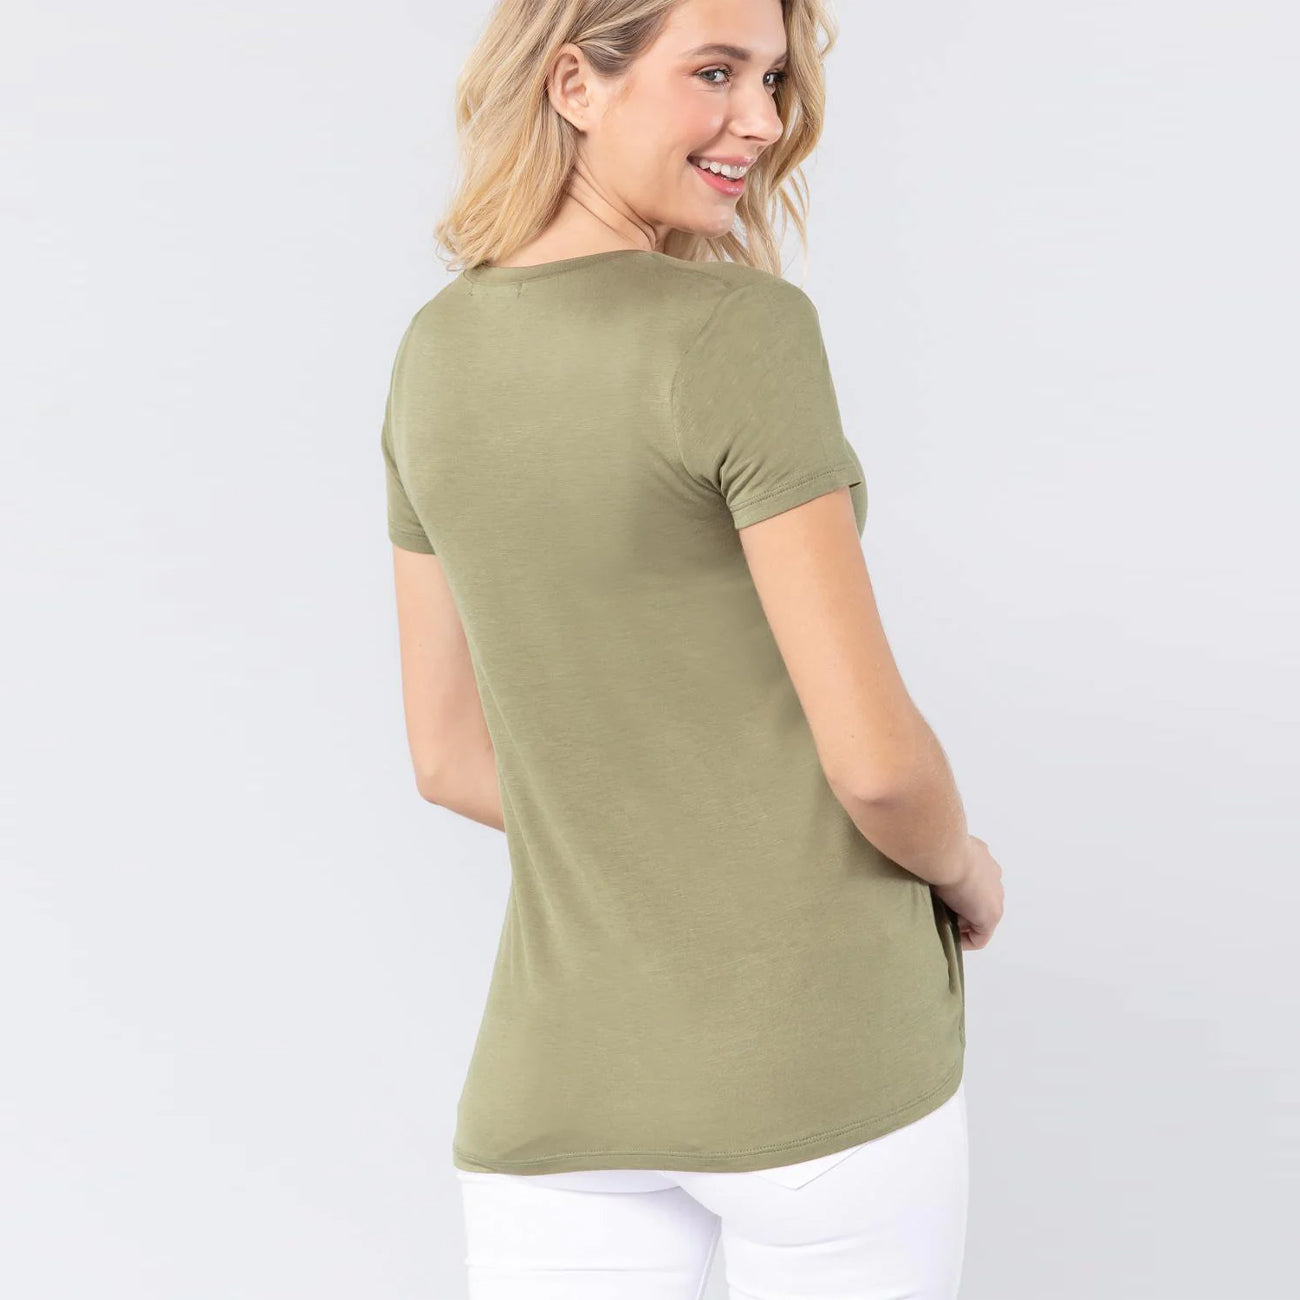 Olive Green V-Neck Rayon Women's Jersey Top